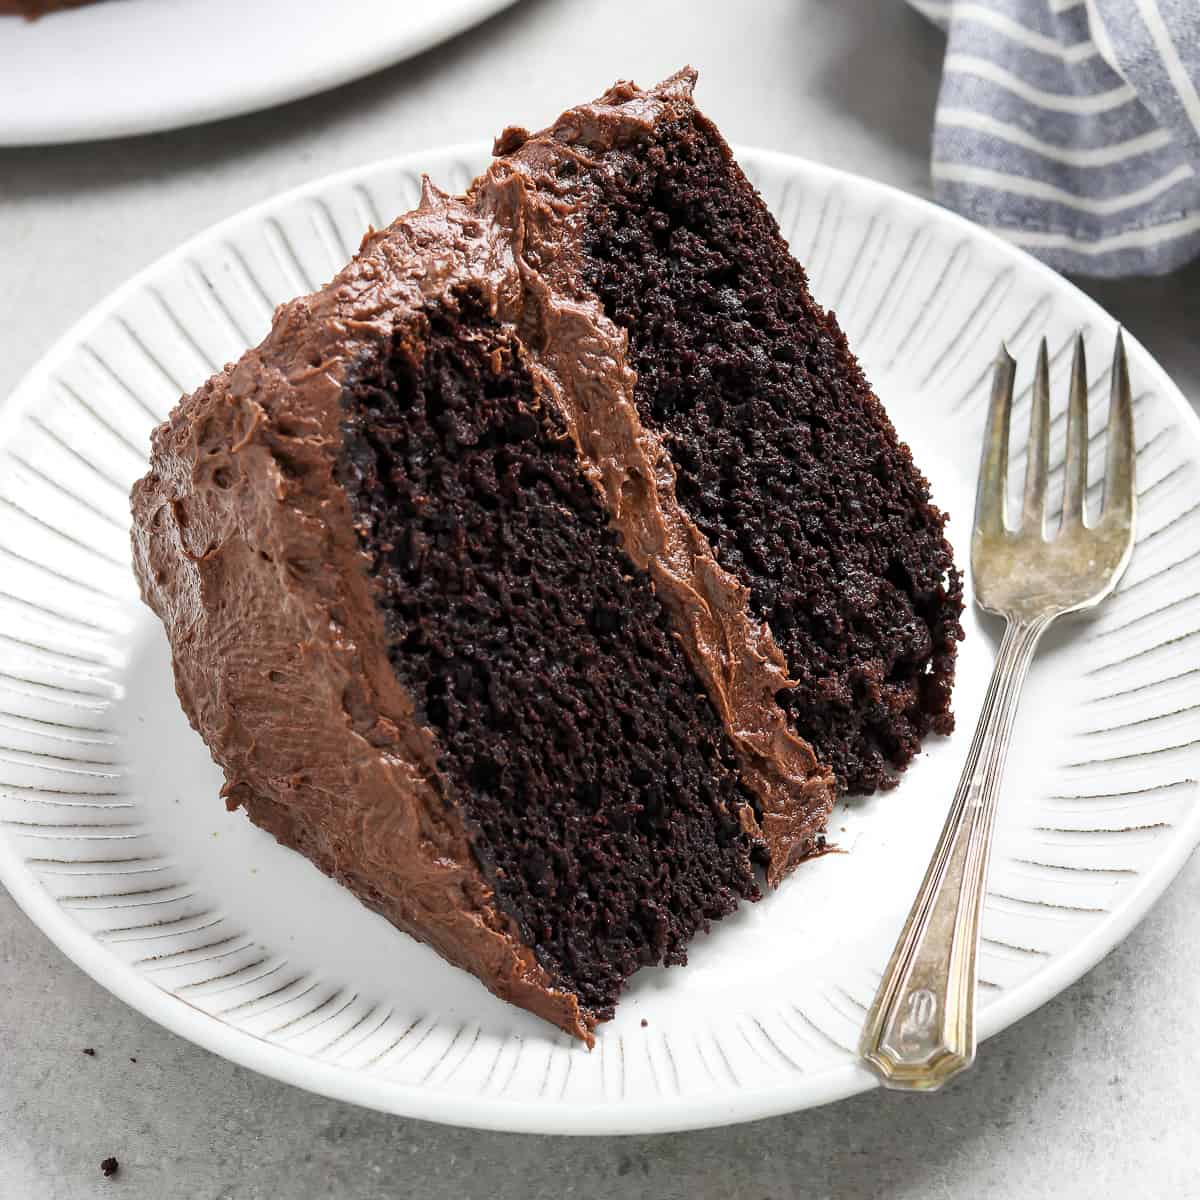 A delectable slice of chocolate cake rests on a pristine plate, accompanied by a gleaming fork